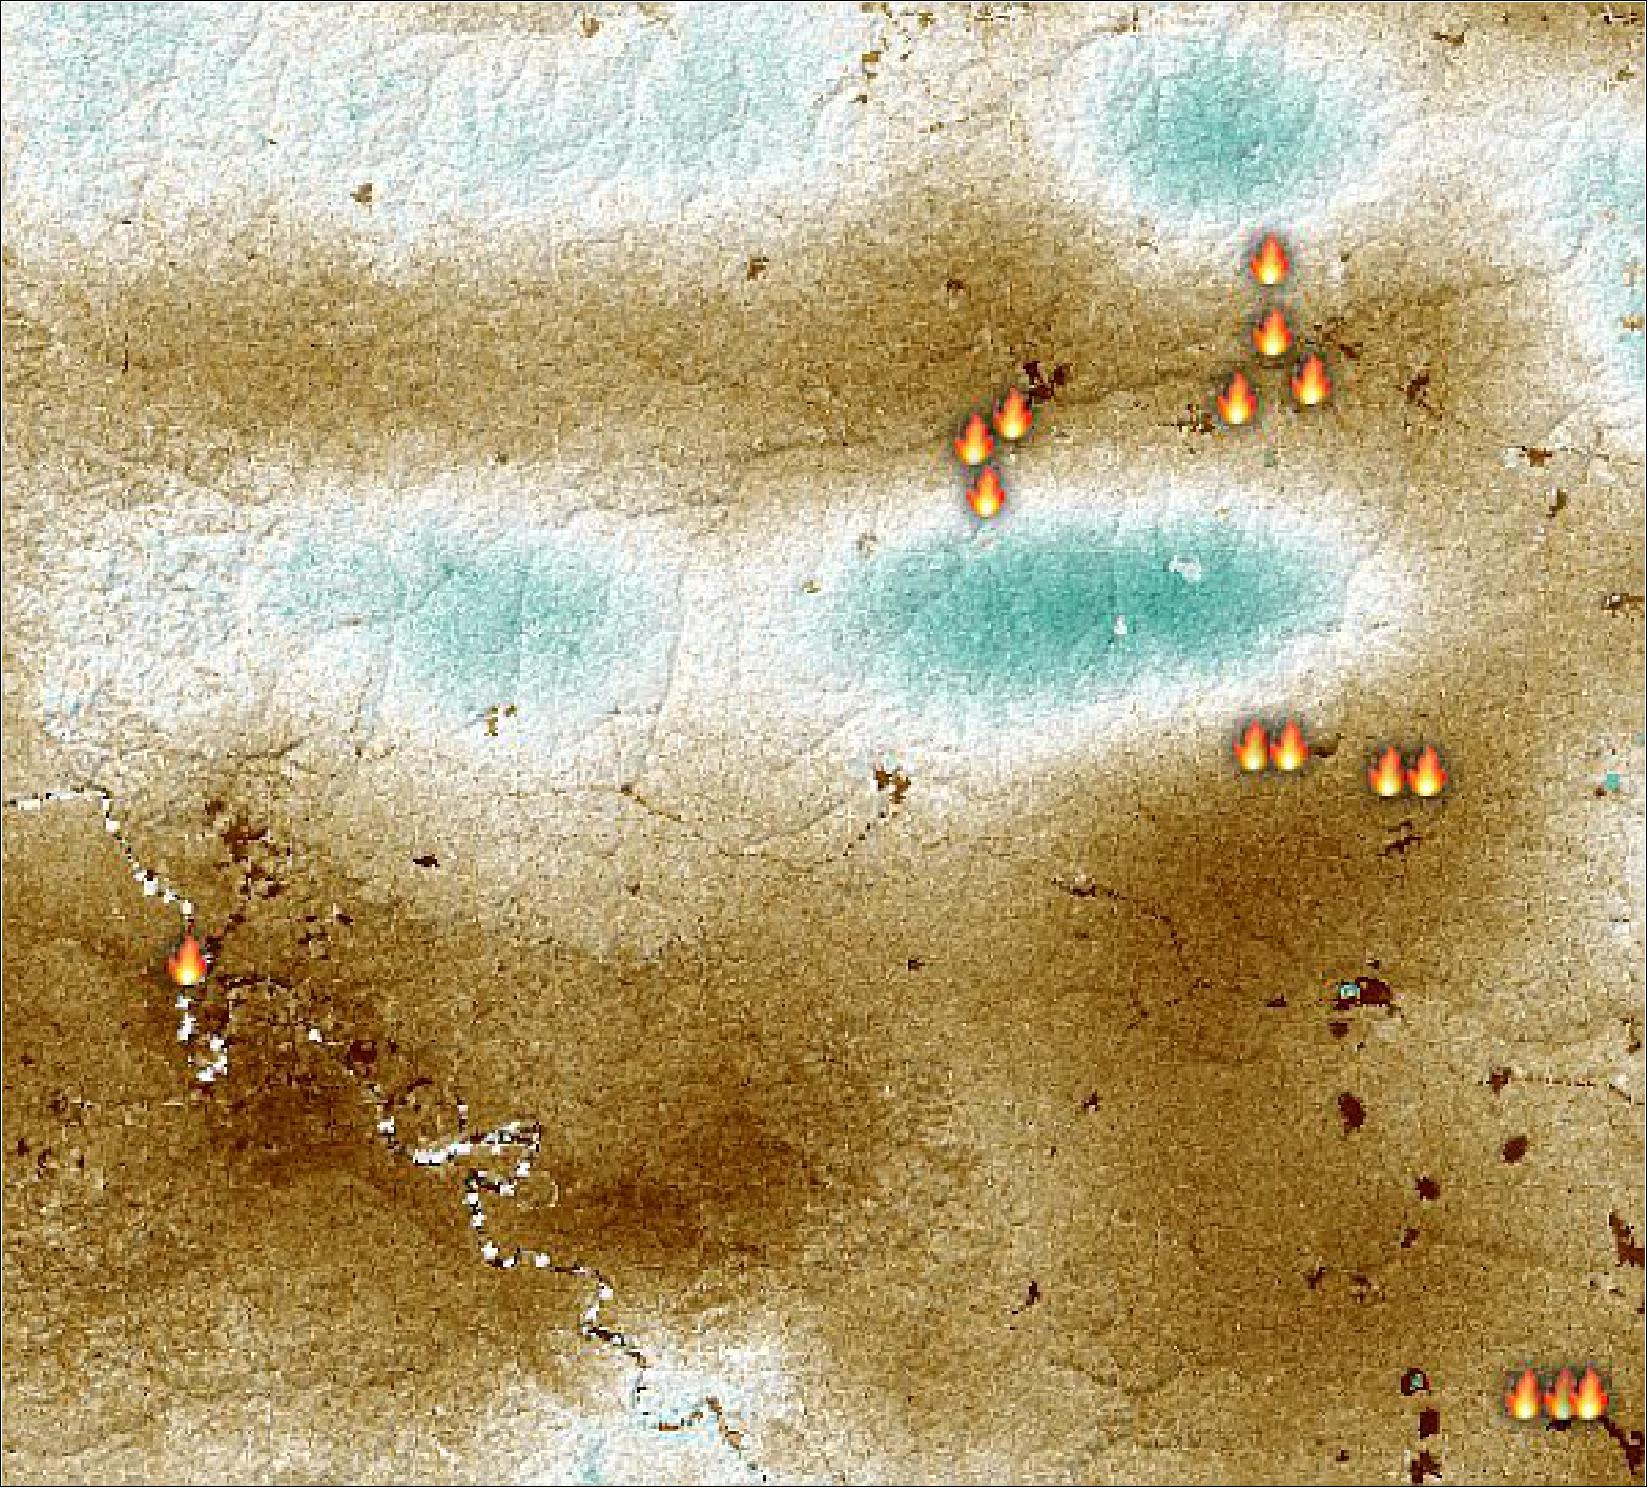 Figure 80: Image of ECOSTRESS data taken over Peru during 2019 wildfires that shows vegetation temperatures in response to water availability. The flame symbols show the locations of the fires whereas the colors indicate the level of evaporative stress. The browner a region is, the less water is available for plants (image credit: NASA)